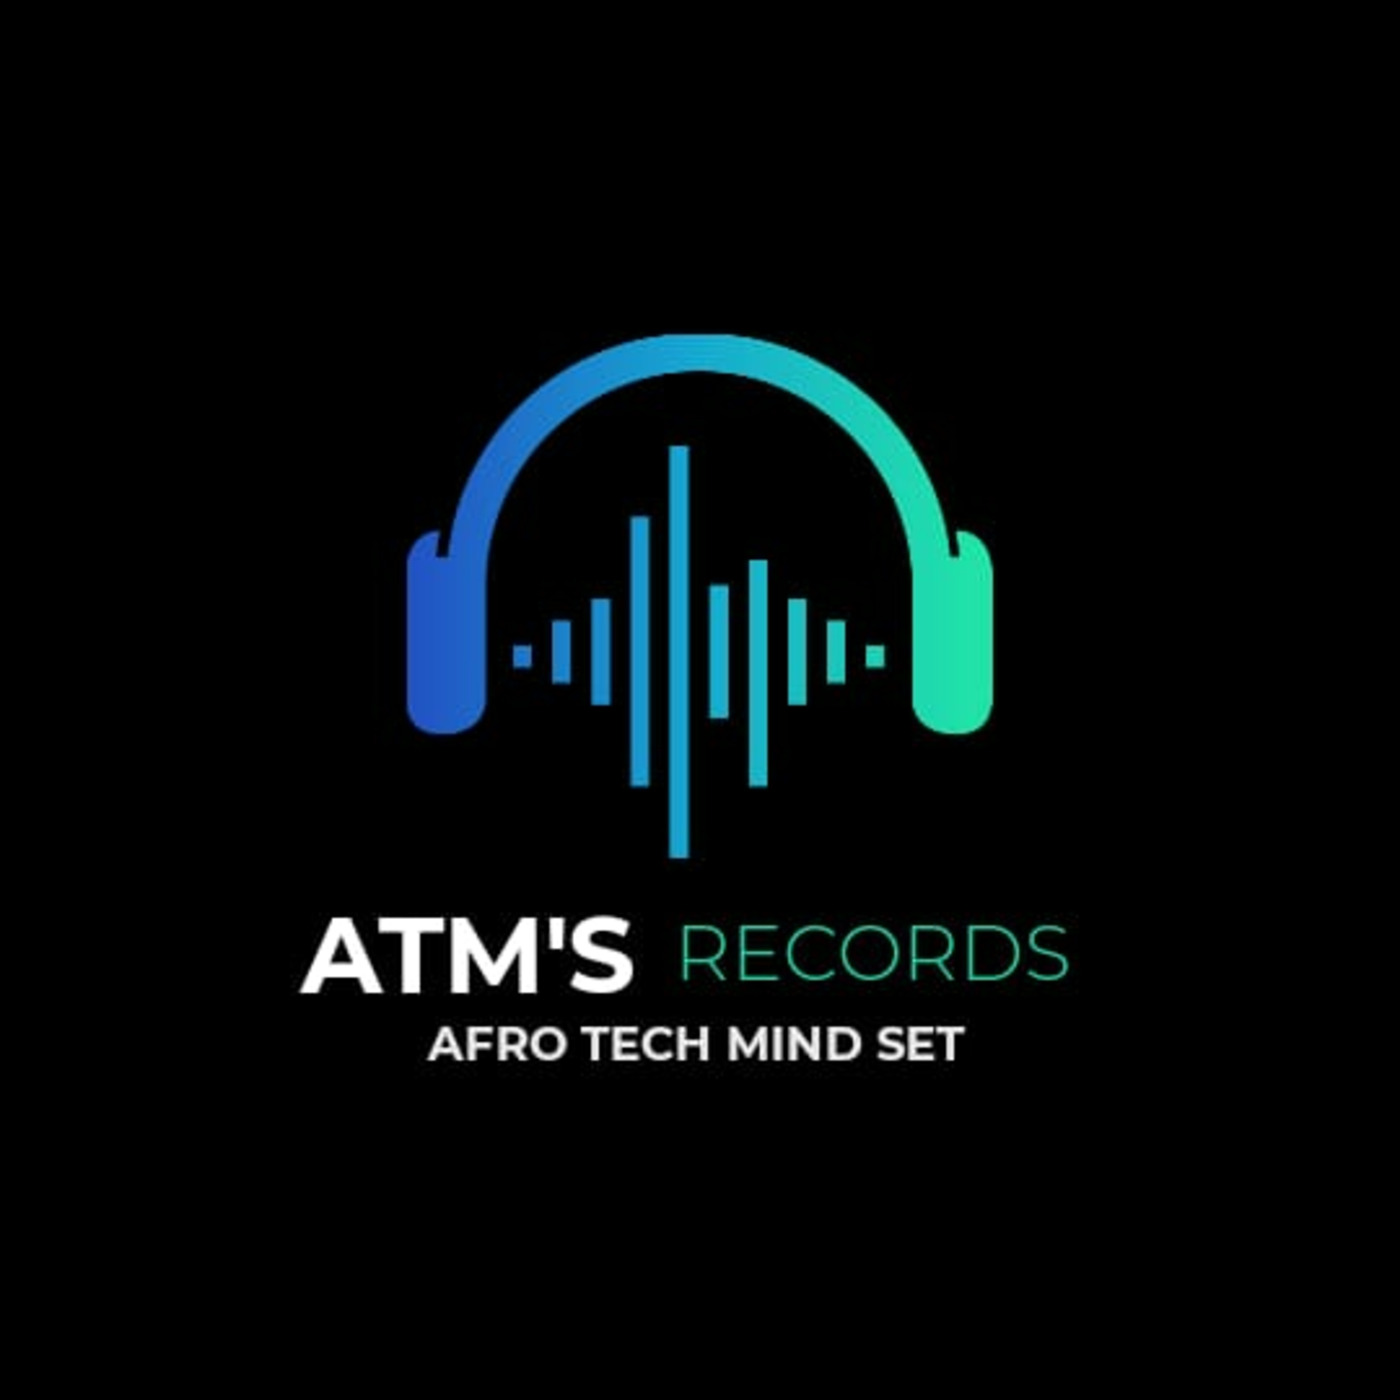 Episode 26: AFRO TECH MIND SET #026 (MIXED BY Ncaness SA)[ATM'S_Records]